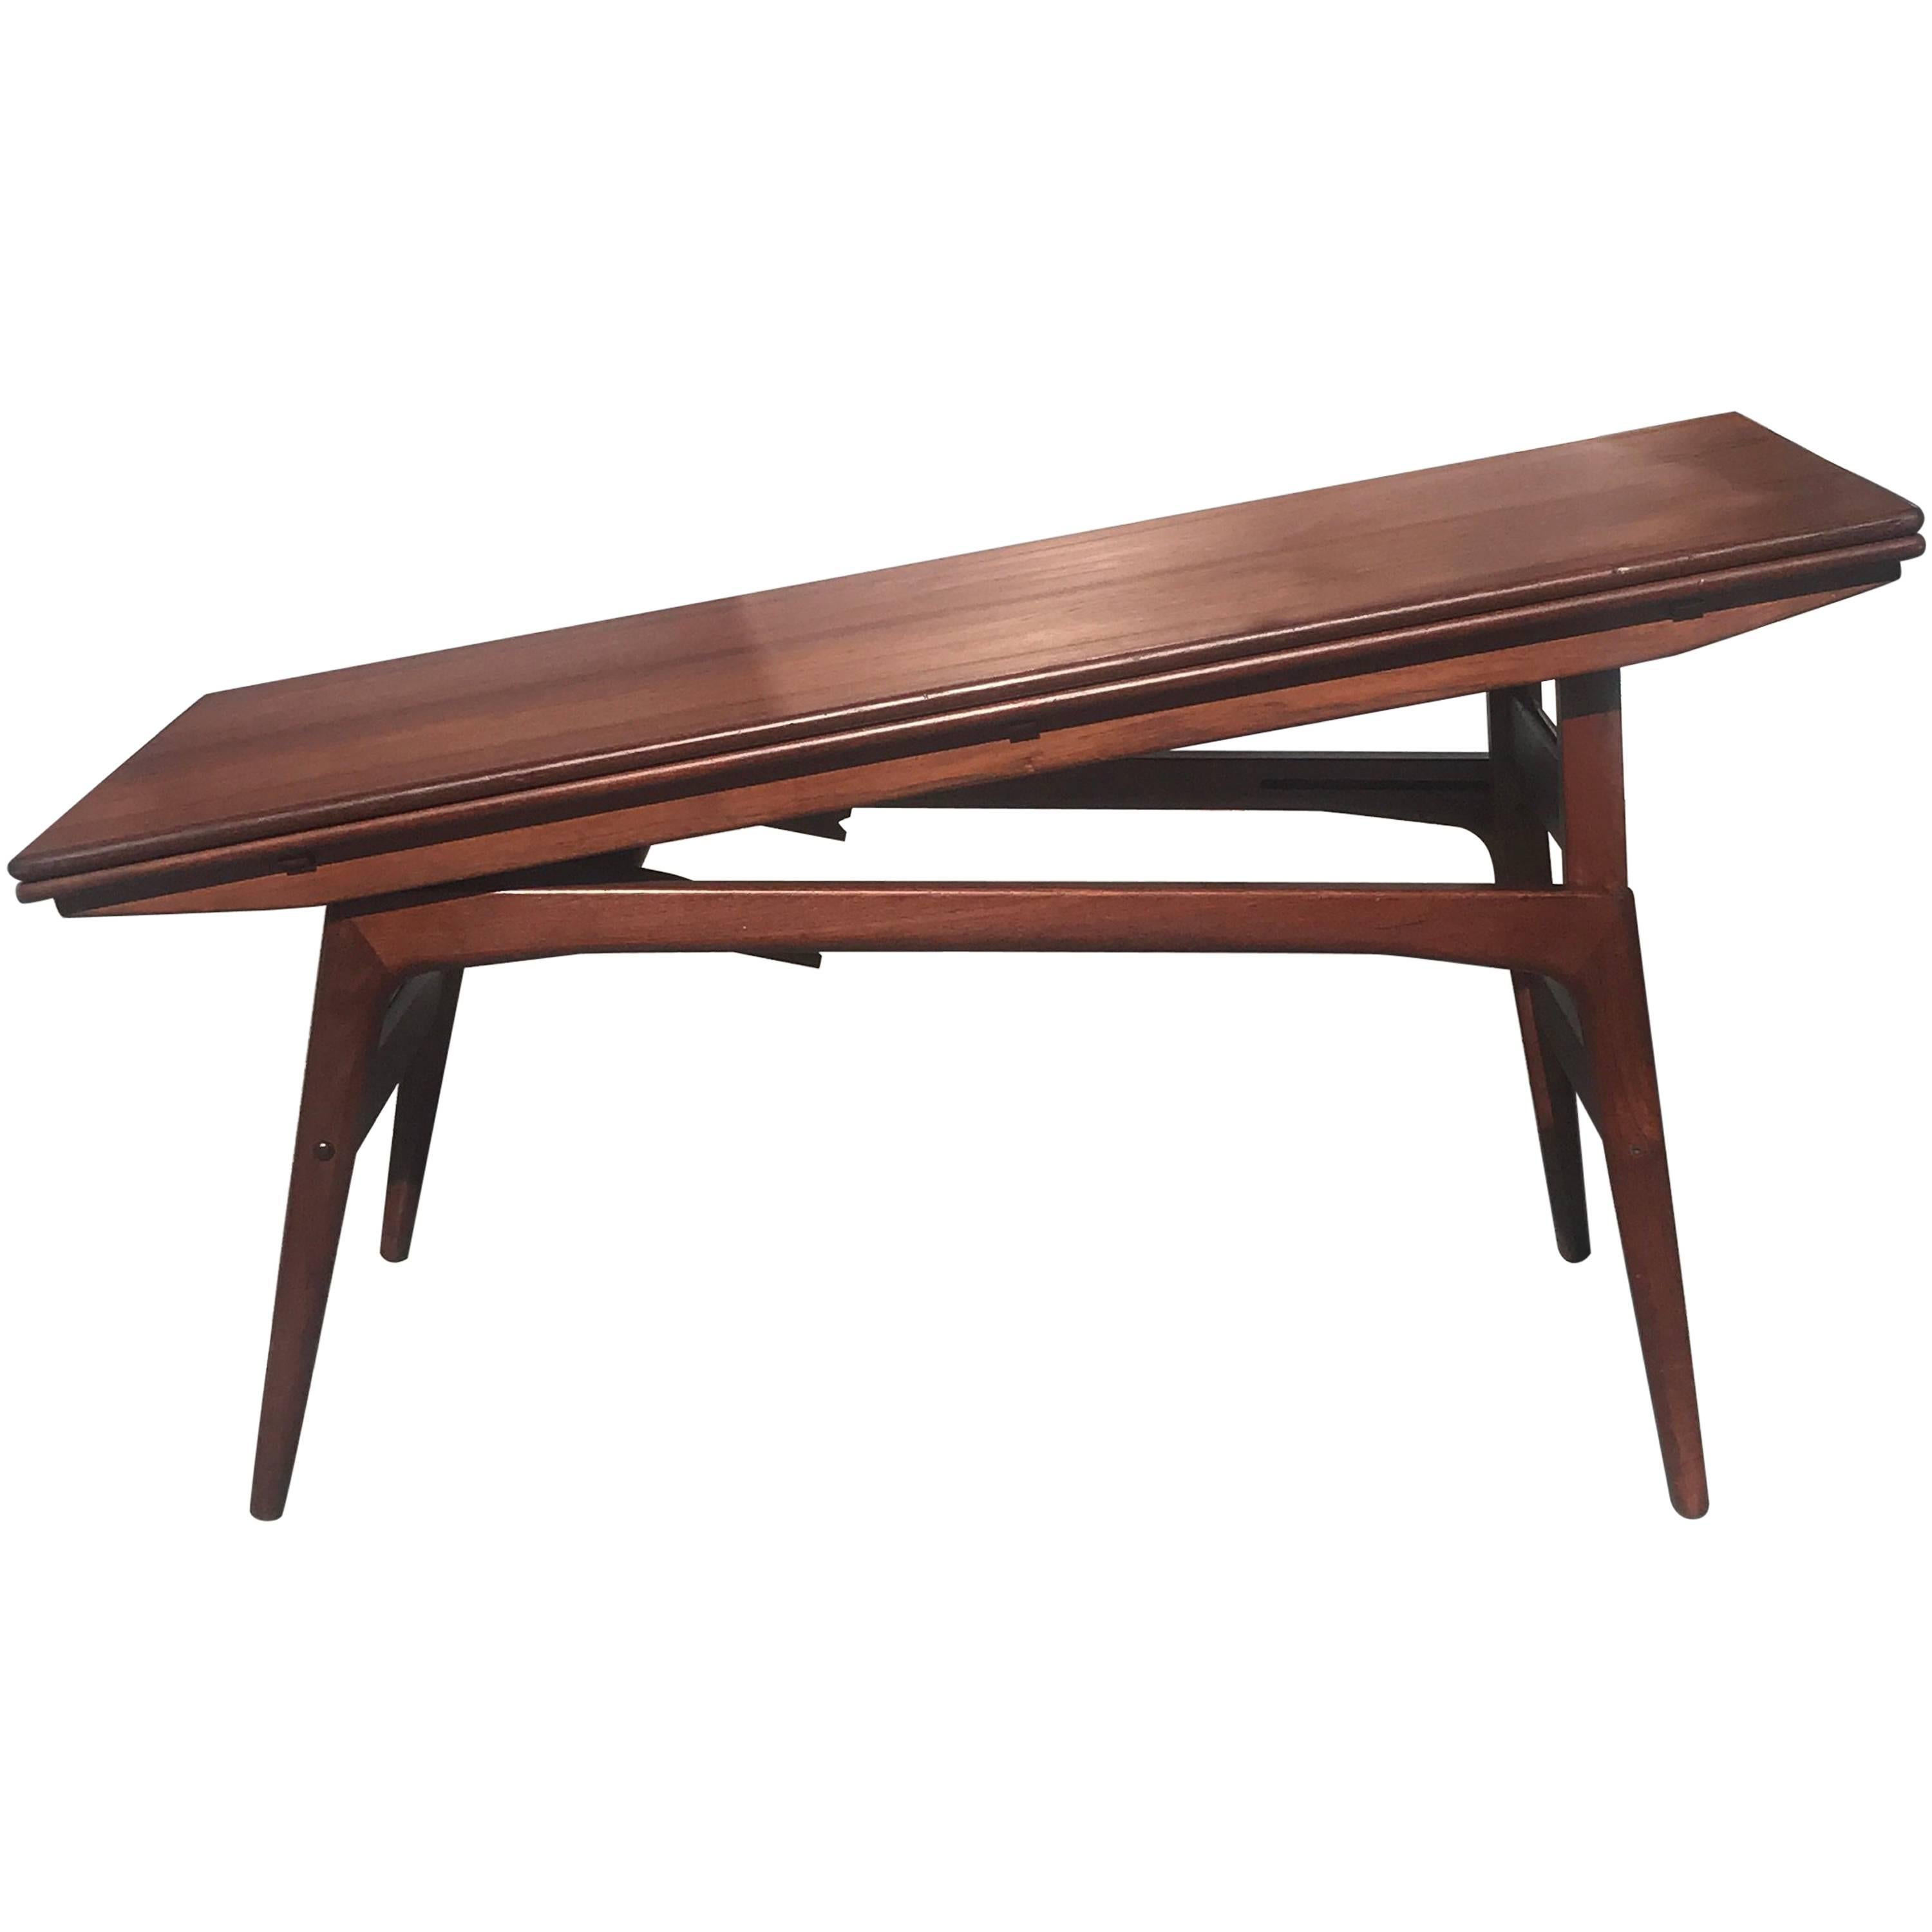 Kai Kristiansen Teak Elevator Coffee to Dining Table with Leaves Made in Denmark